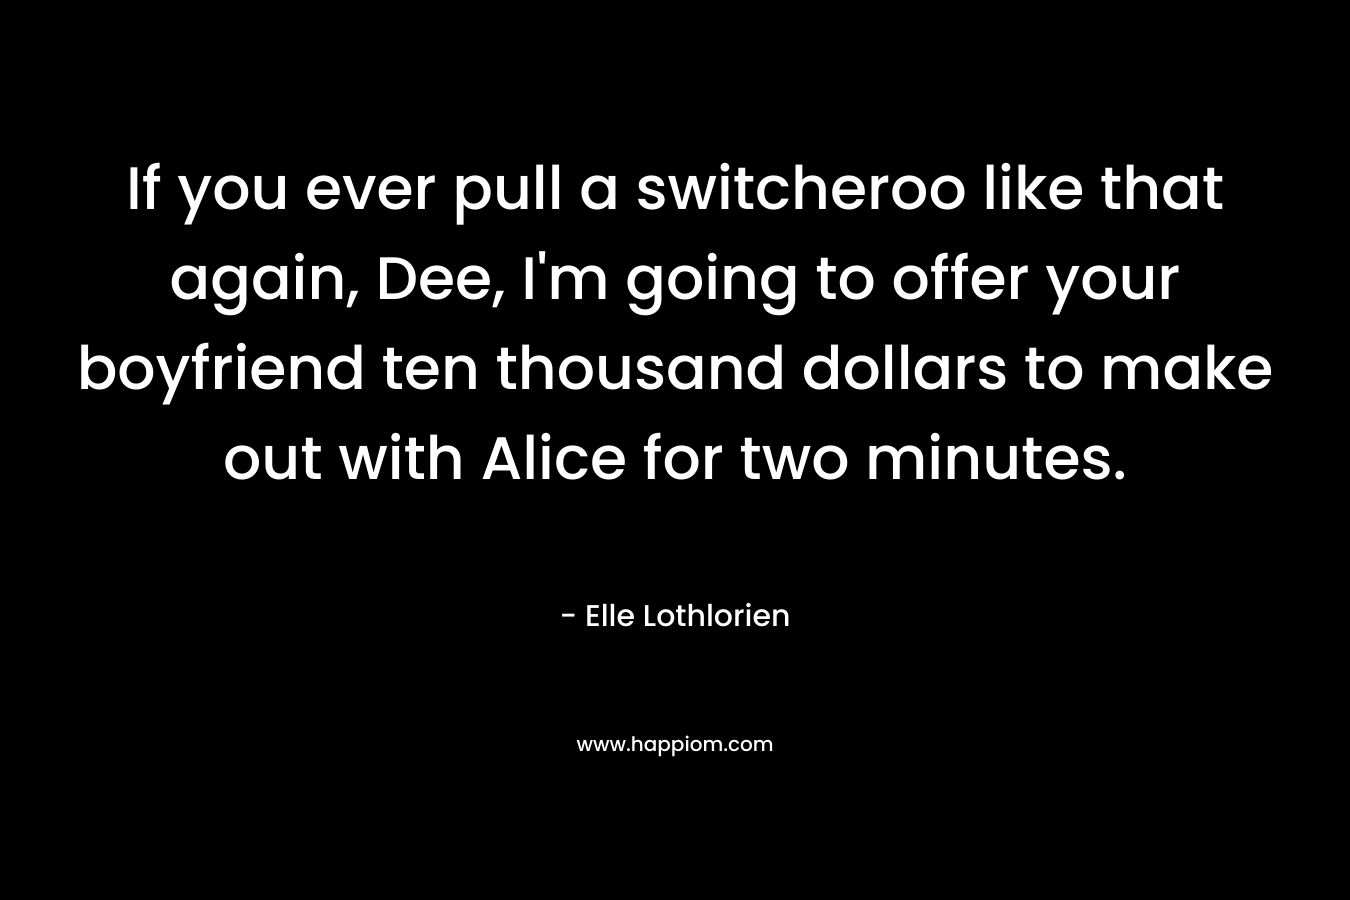 If you ever pull a switcheroo like that again, Dee, I’m going to offer your boyfriend ten thousand dollars to make out with Alice for two minutes. – Elle Lothlorien